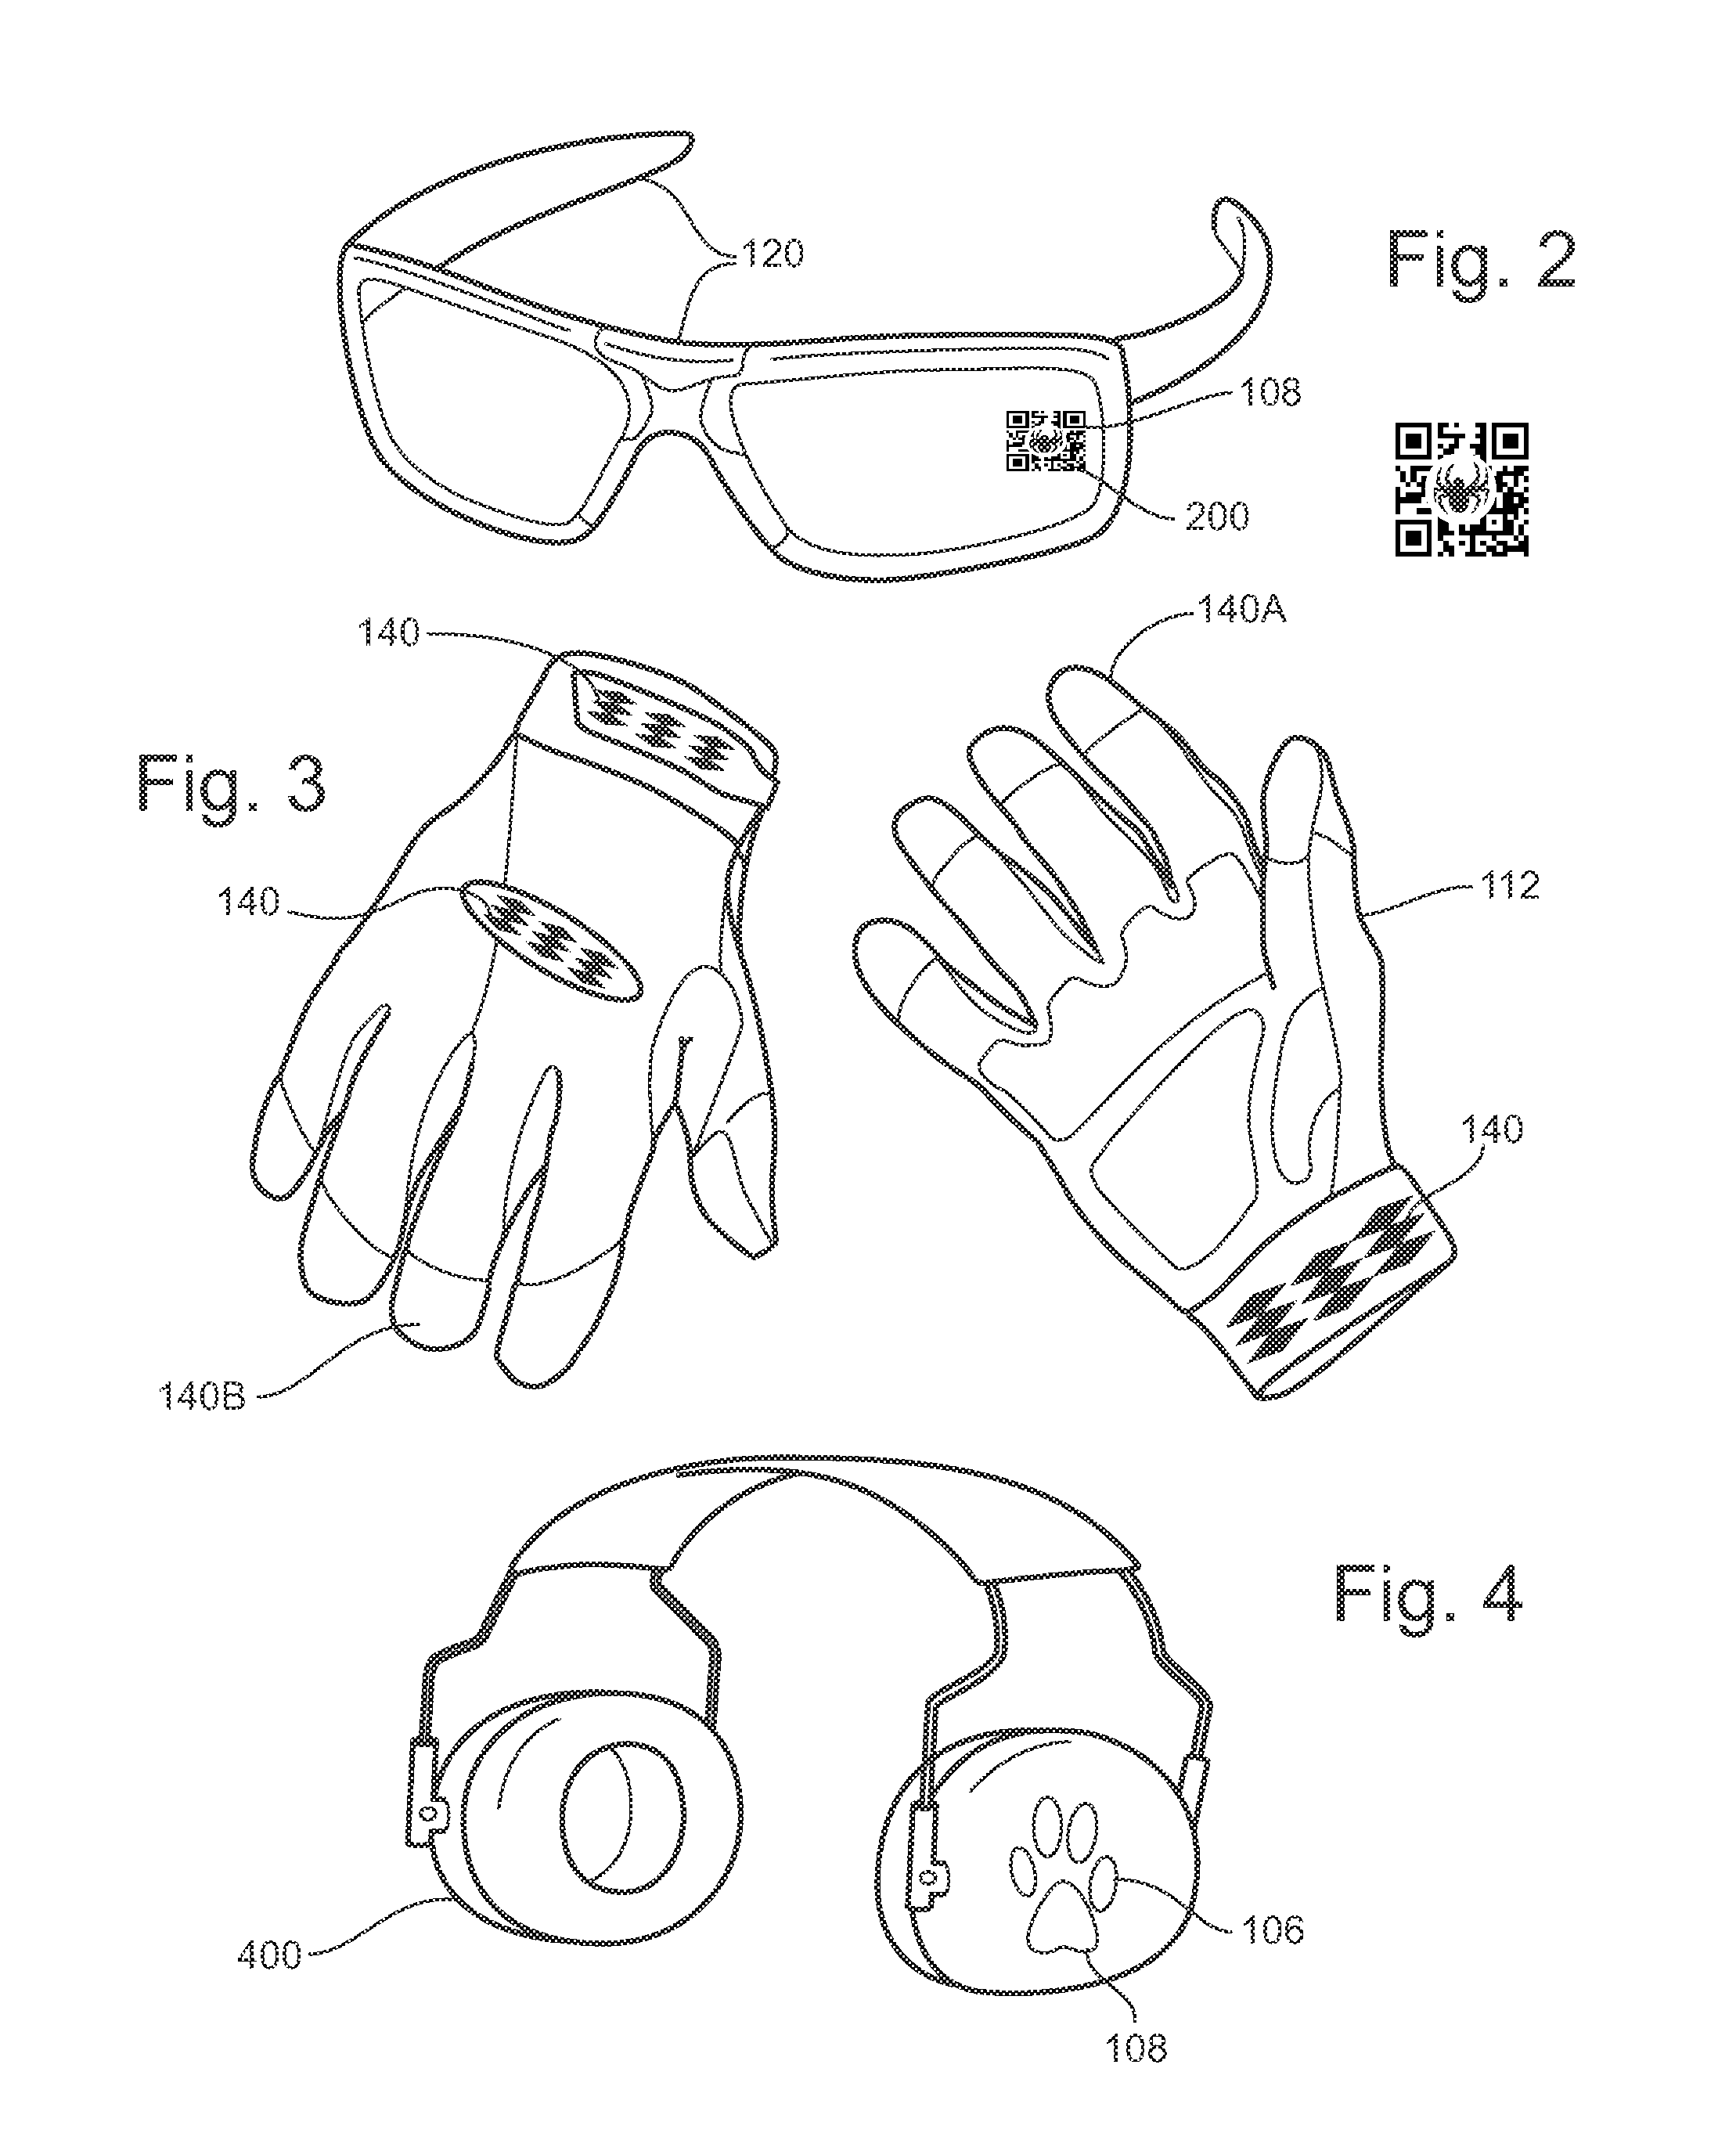 Systems and methods for monitoring personal protection equipment and promoting worker safety